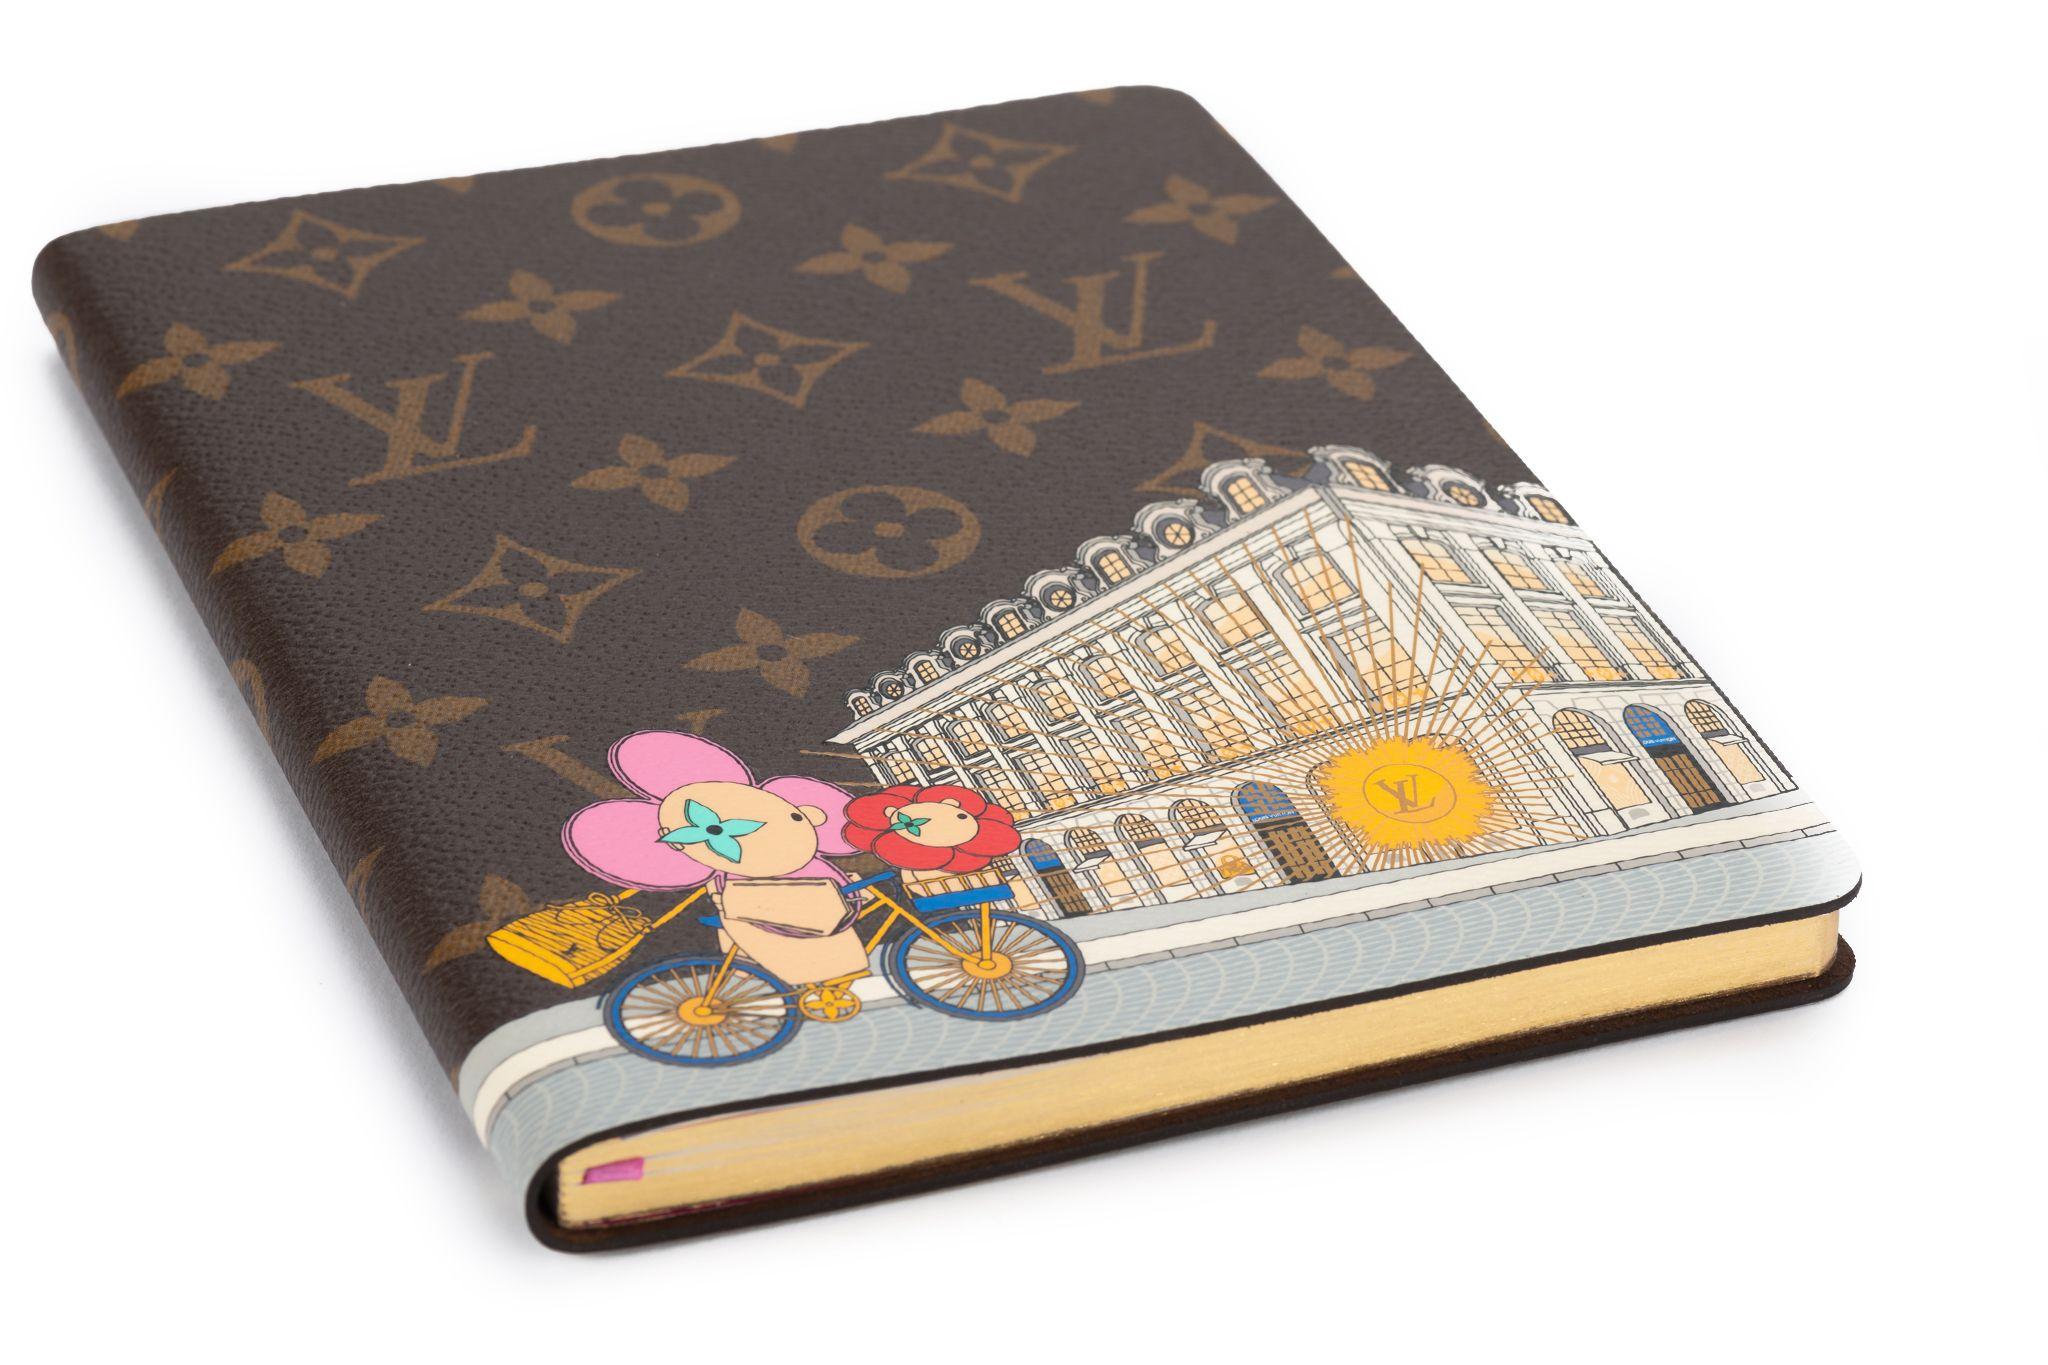 Louis Vuitton Notebook belongs to the Vivienne Holidays 2022 collection. It's brand new and comes with the original dustcover and box.